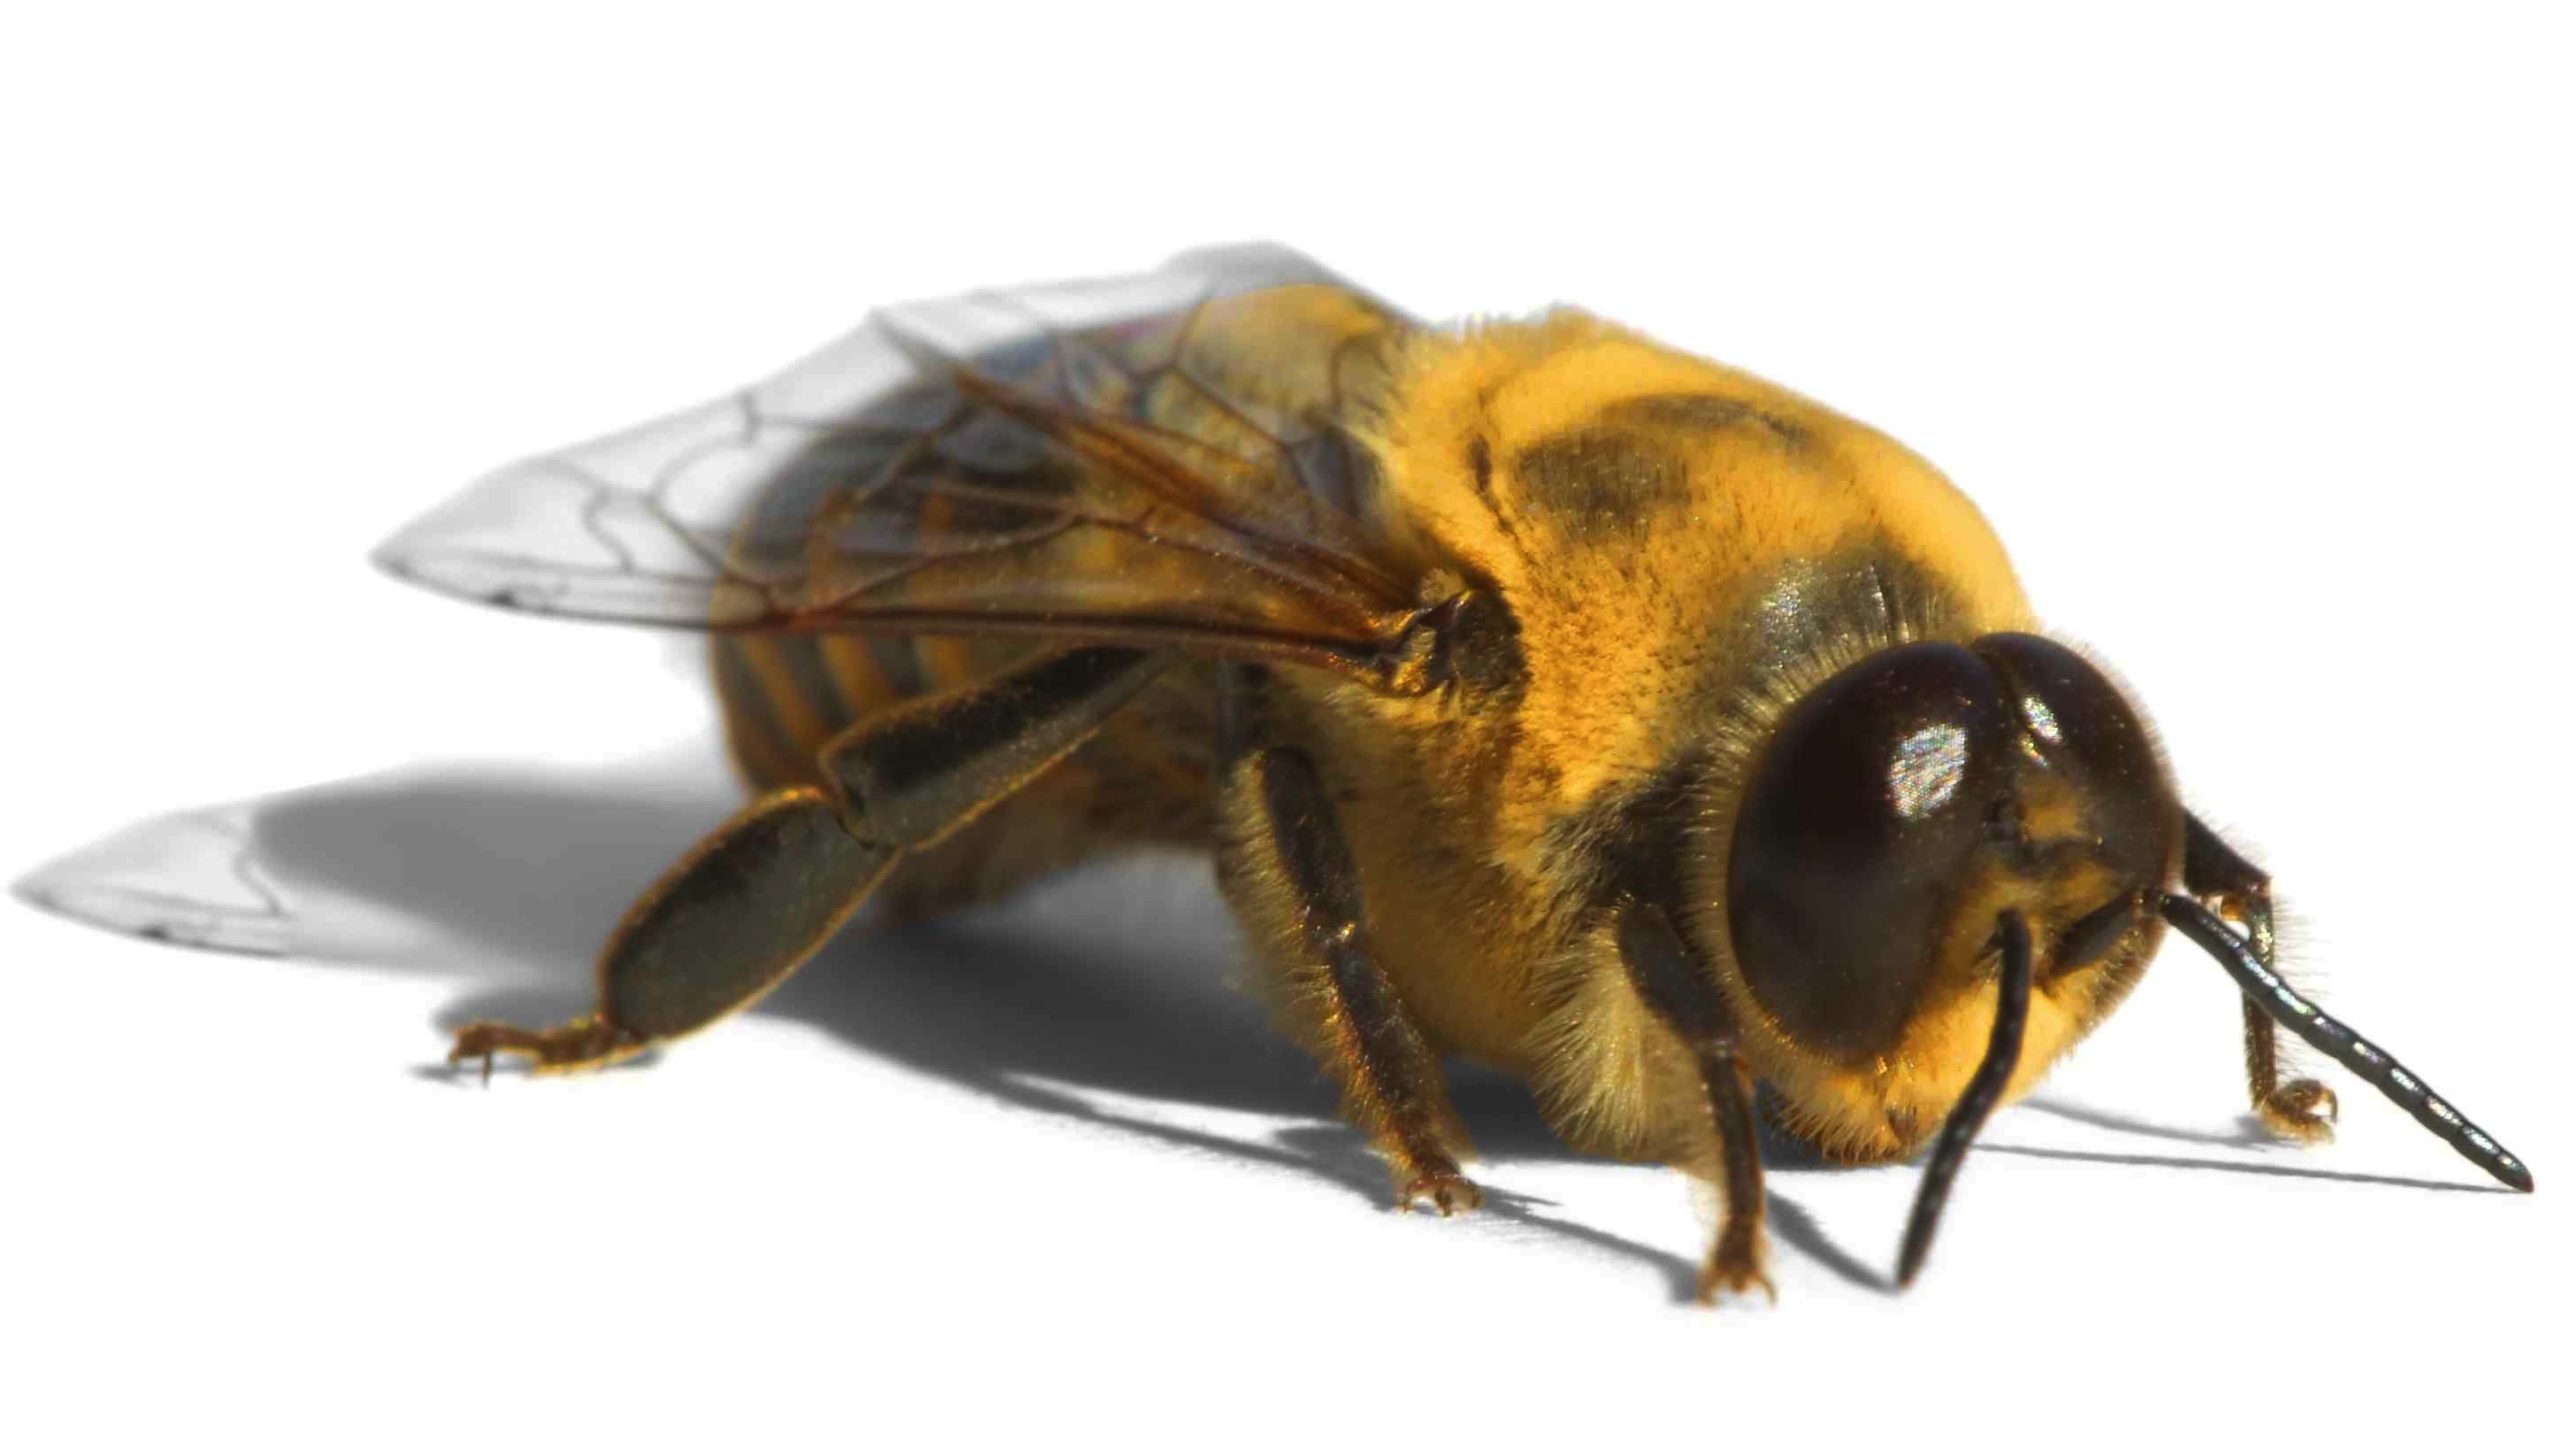 drone bee size